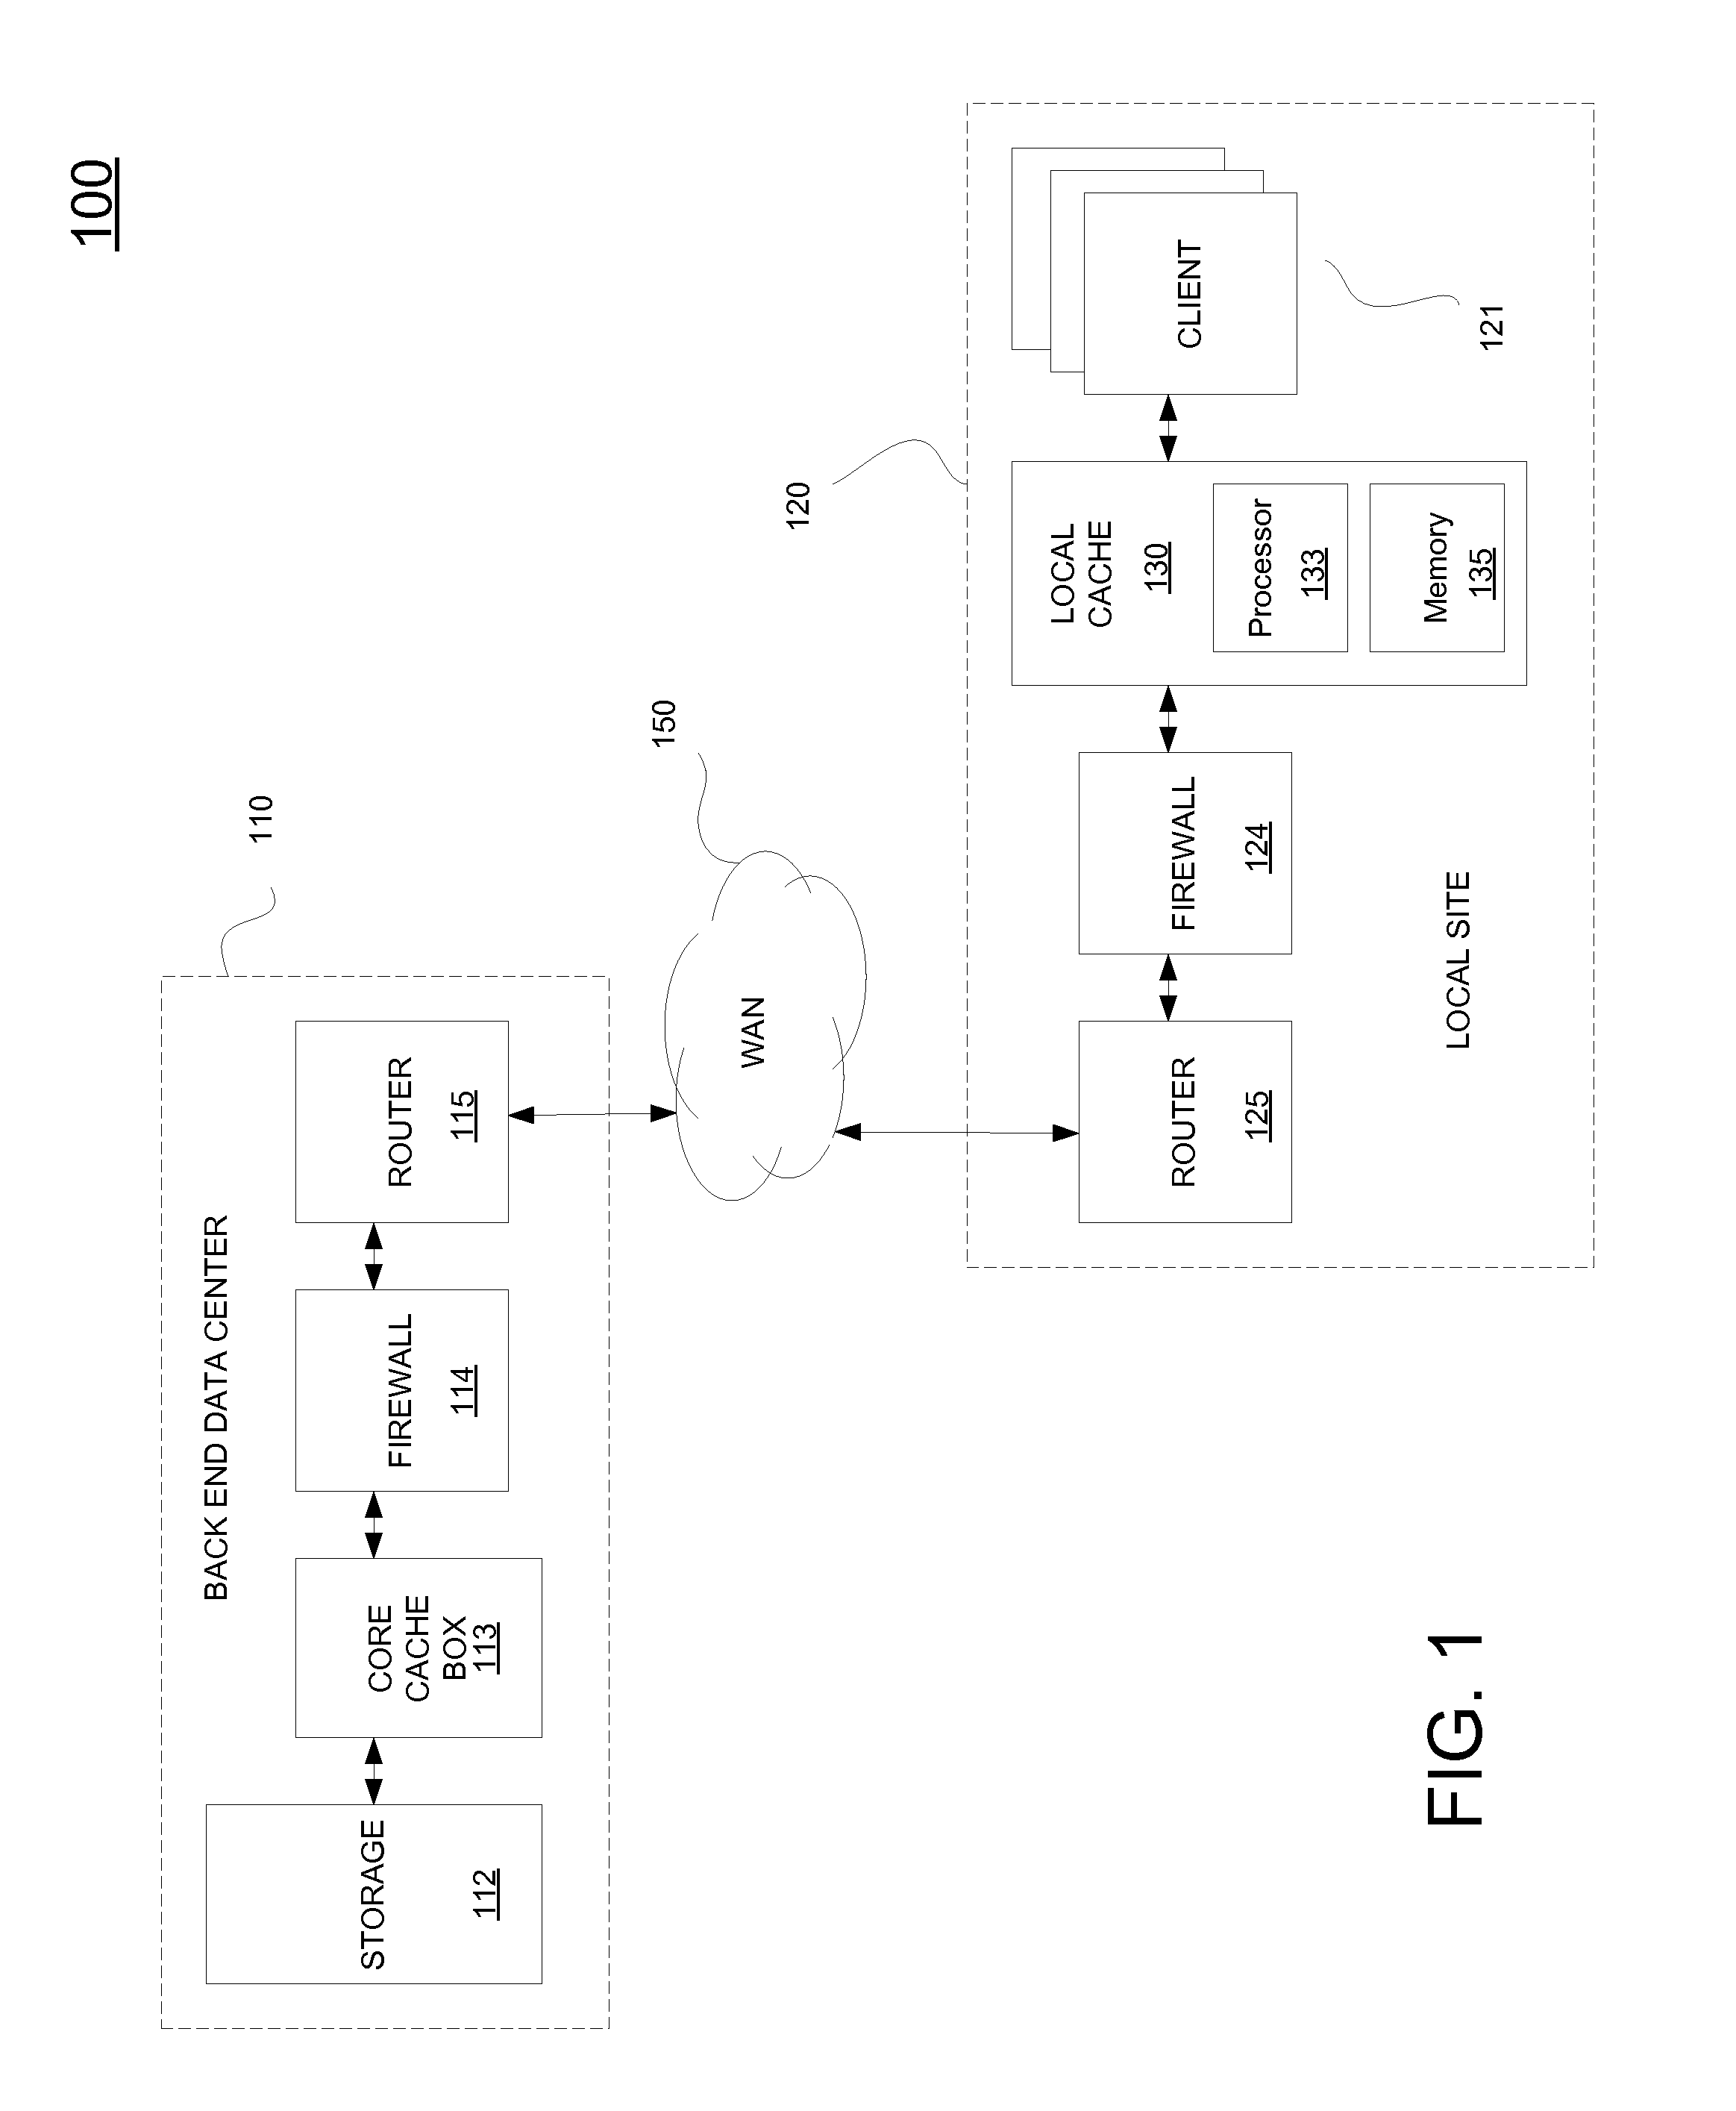 Method and system for smart object eviction for proxy cache